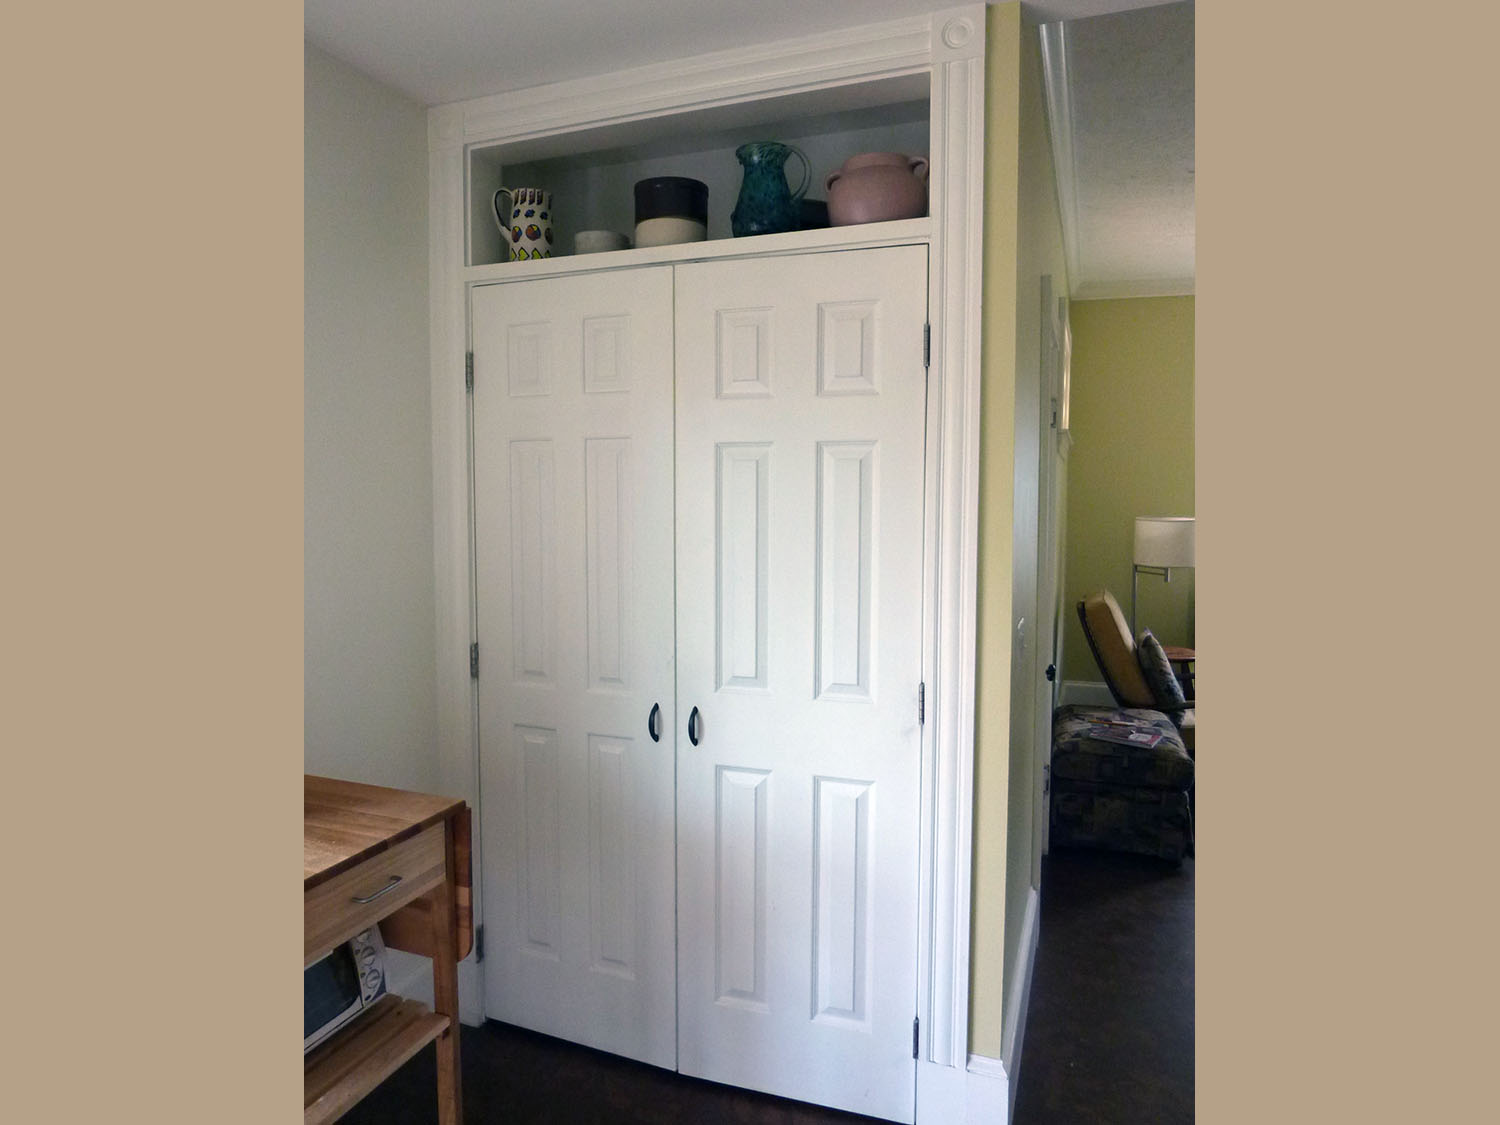 These doors are among her Reuse Center purchases . . .